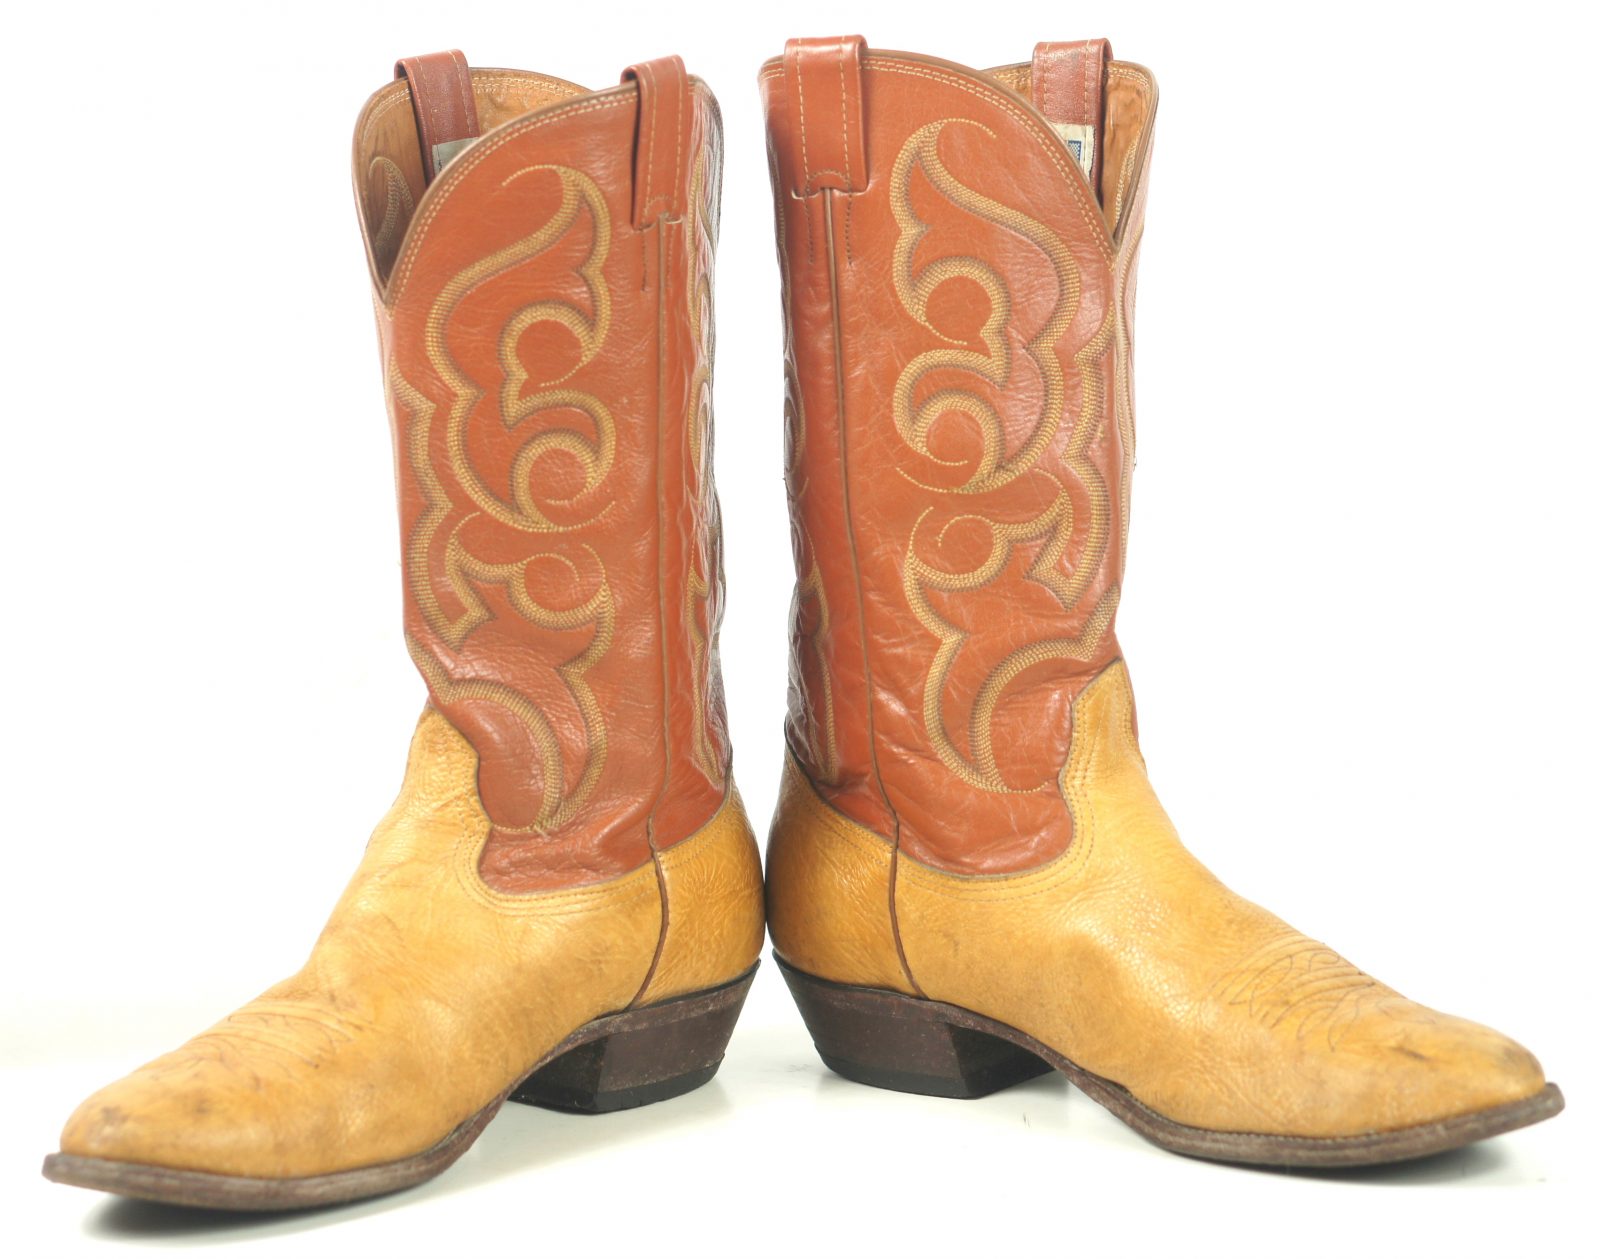 Nocona Western Cowboy Boots Two Tone Brown Leather Vintage US Made (7)